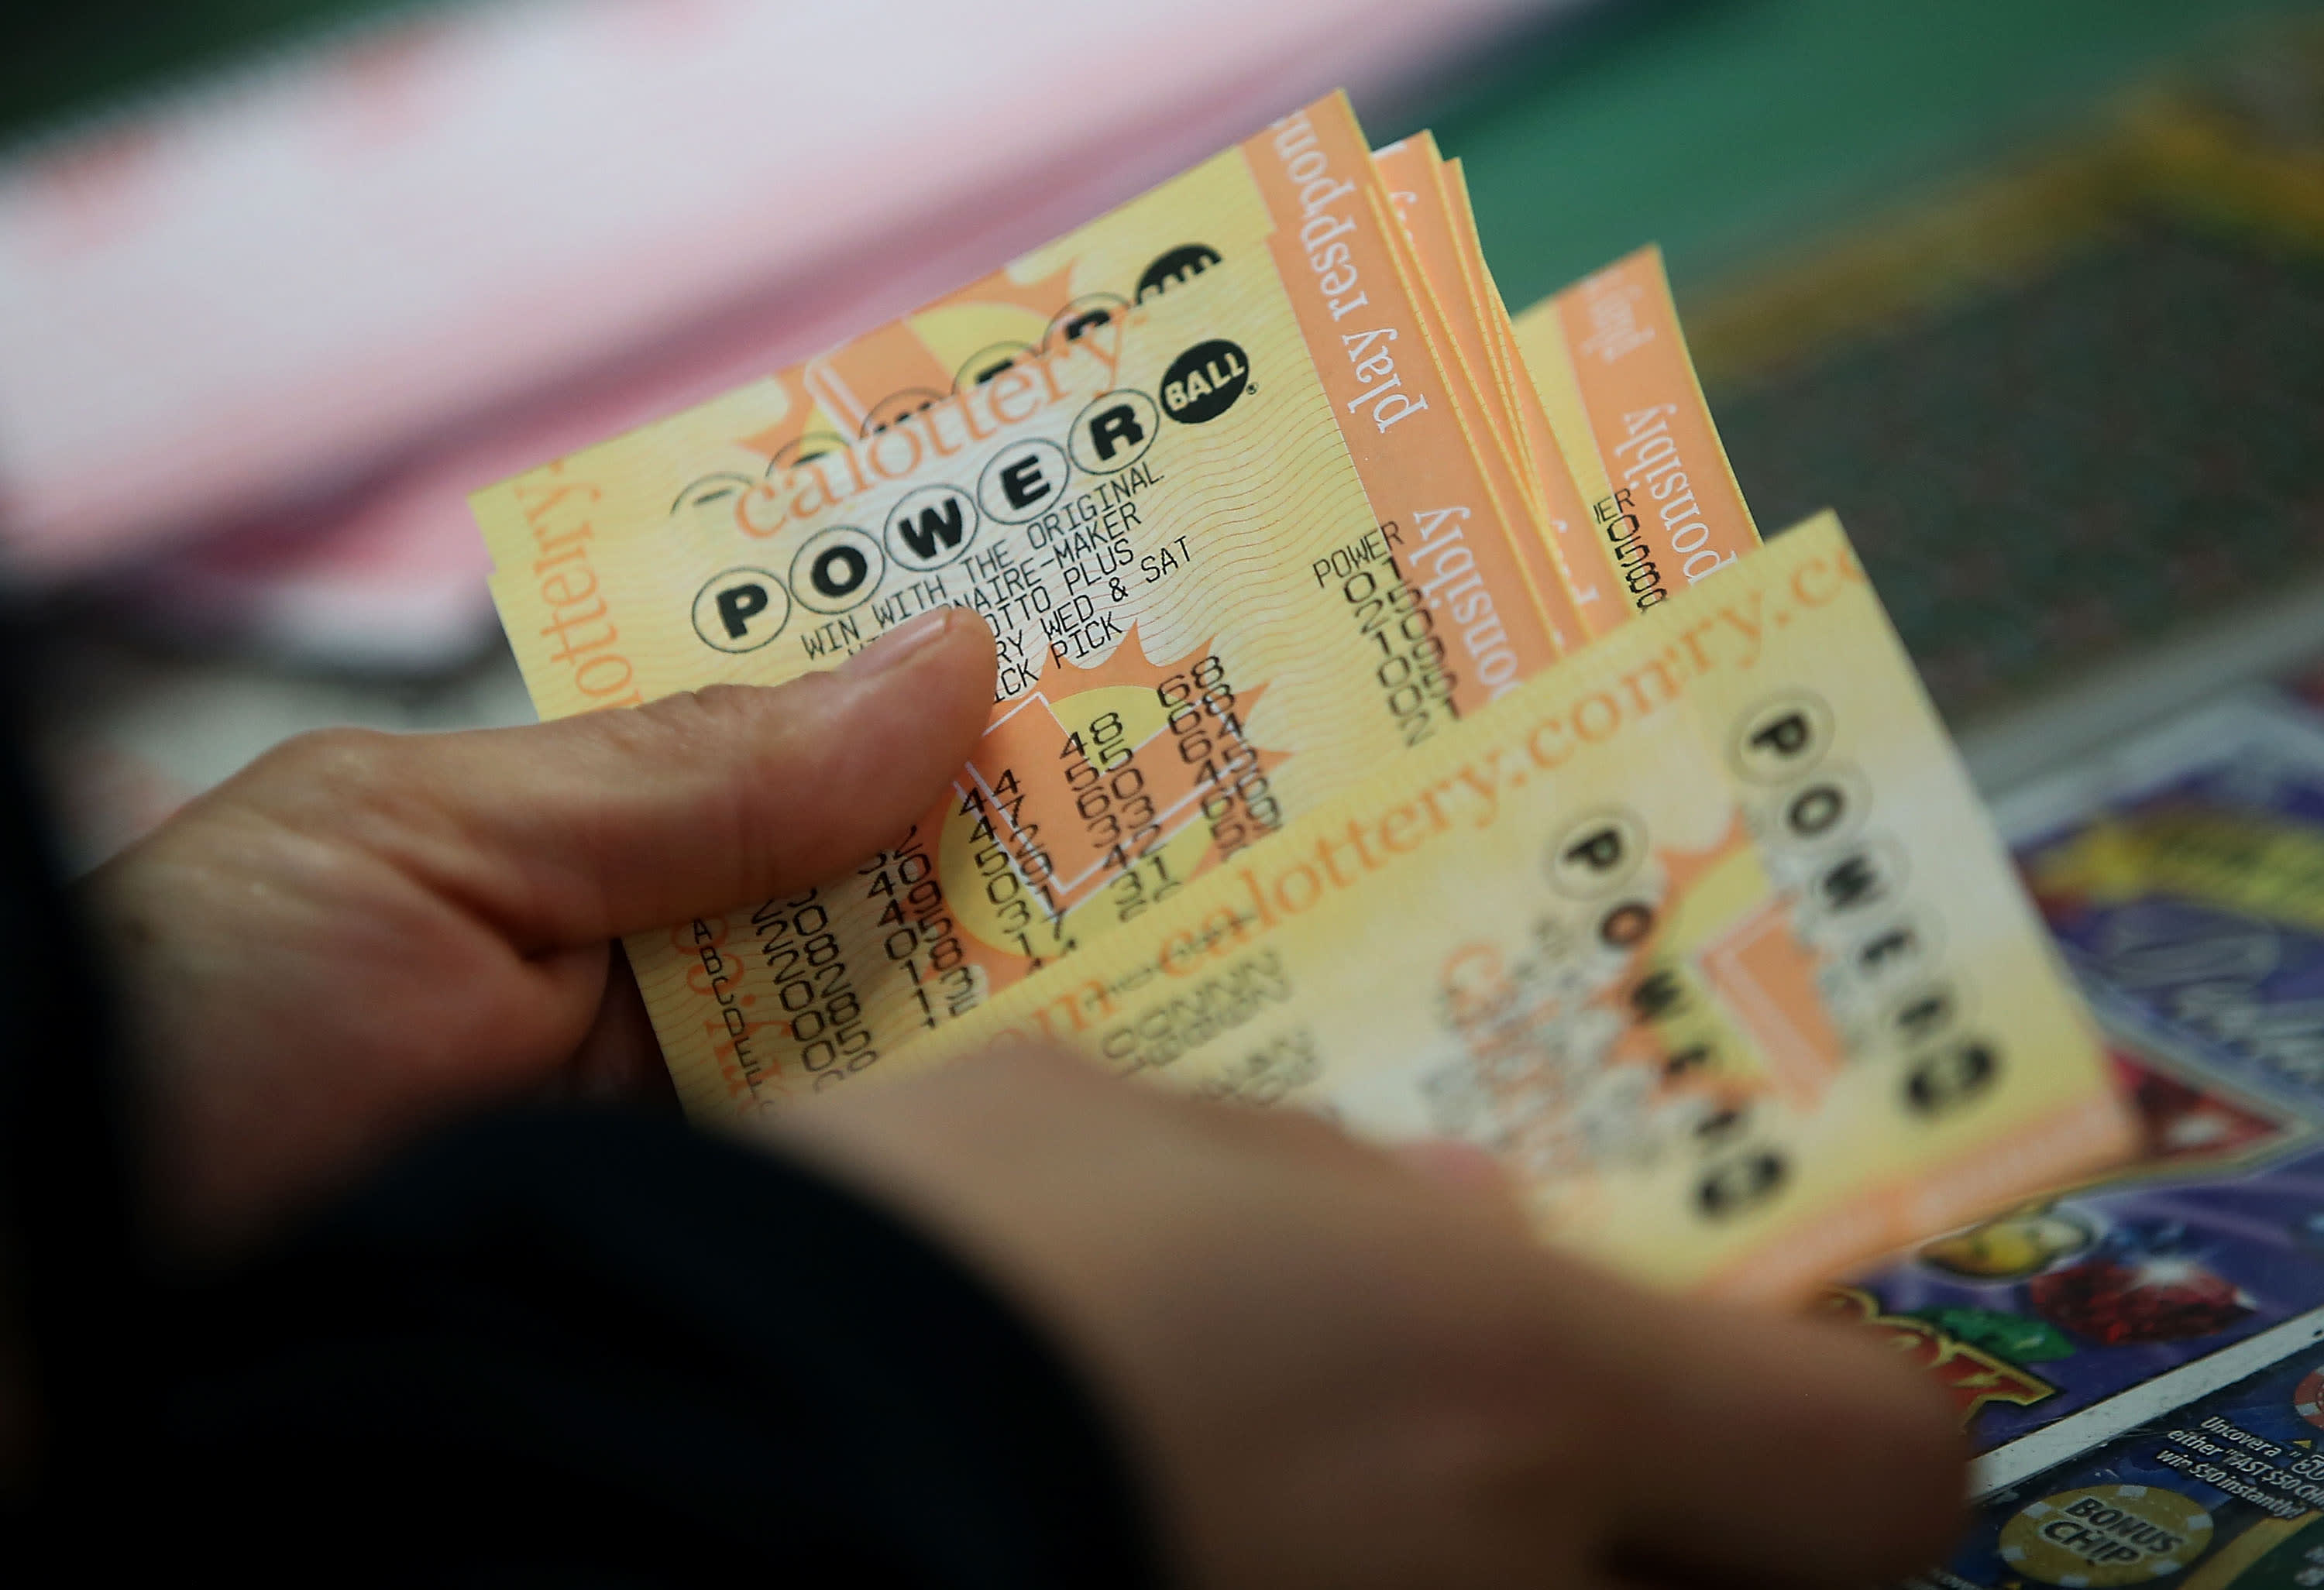 Powerball rises to $1.2B for Wednesday drawing